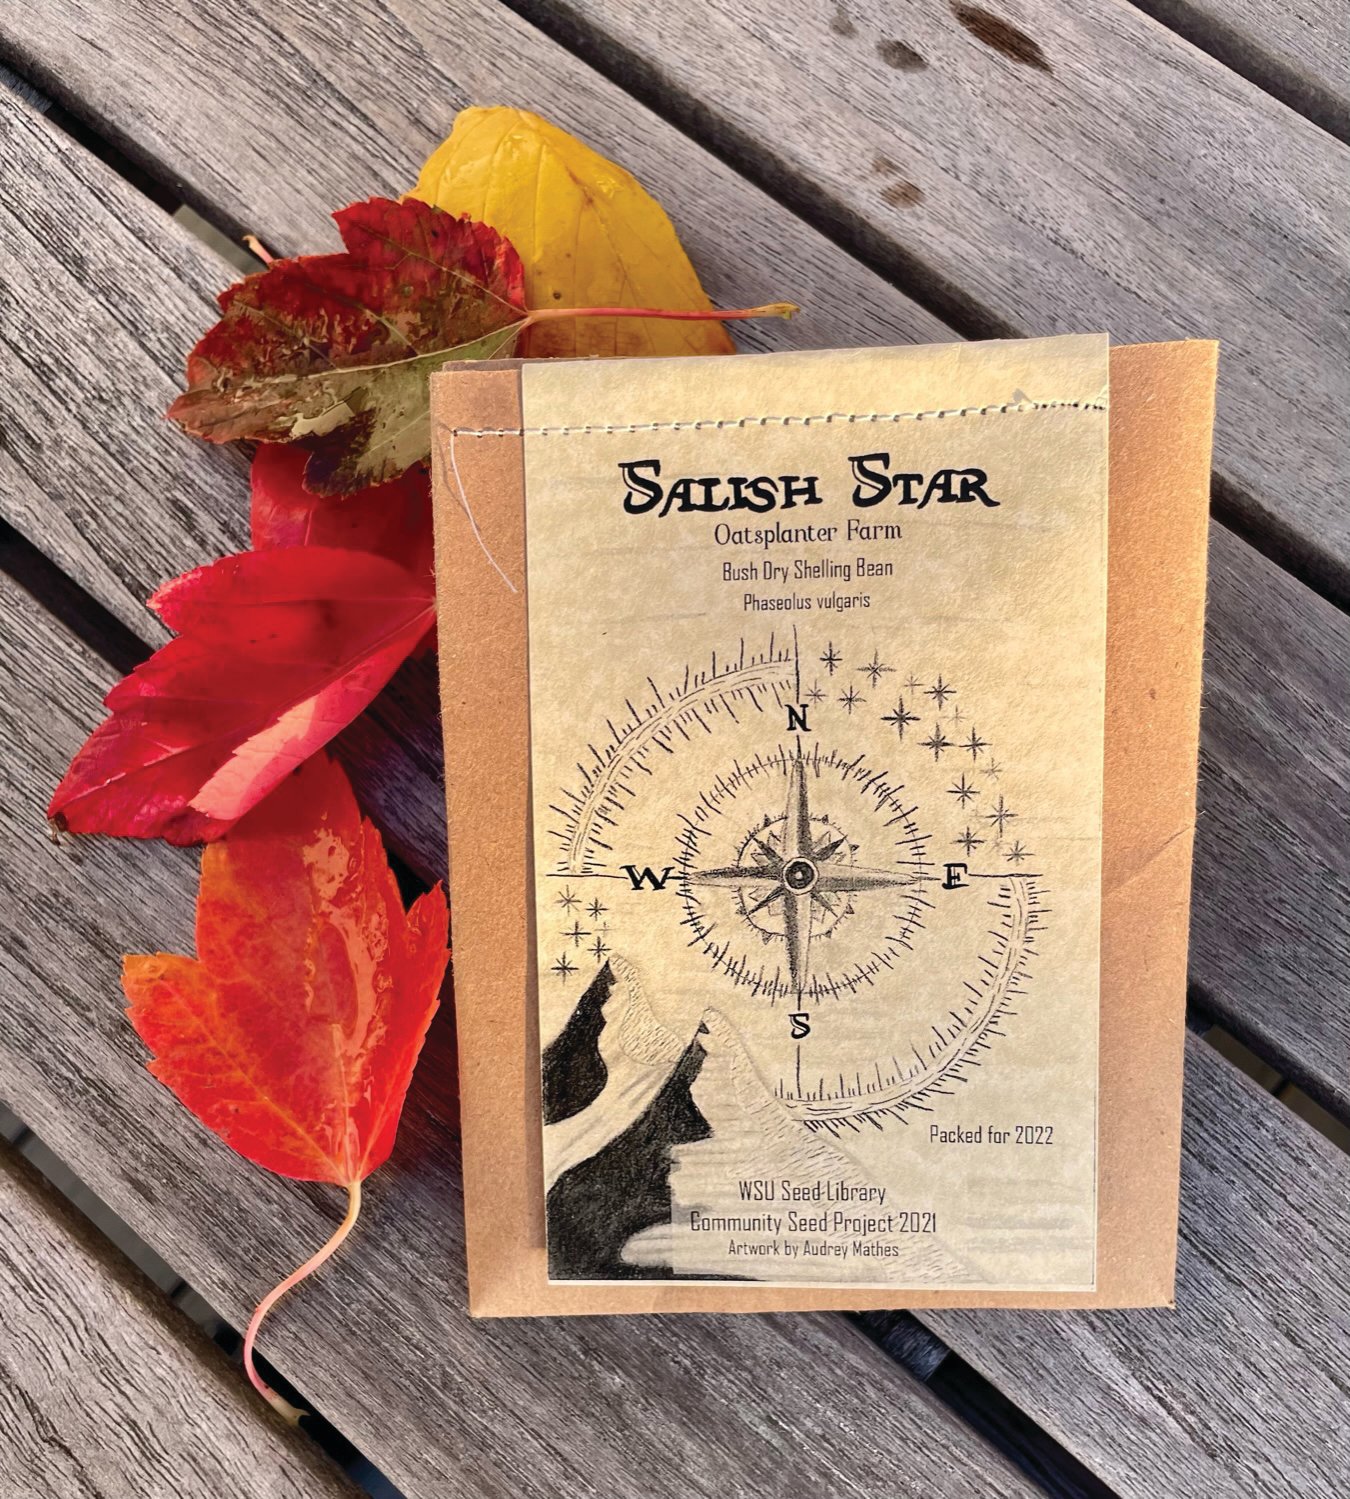 Chimacum art student Audrey Matthes designed the seed packet for the Salish Star black shelling bean developed at Oatsplanter Farm. The seed proved to be highly productive.